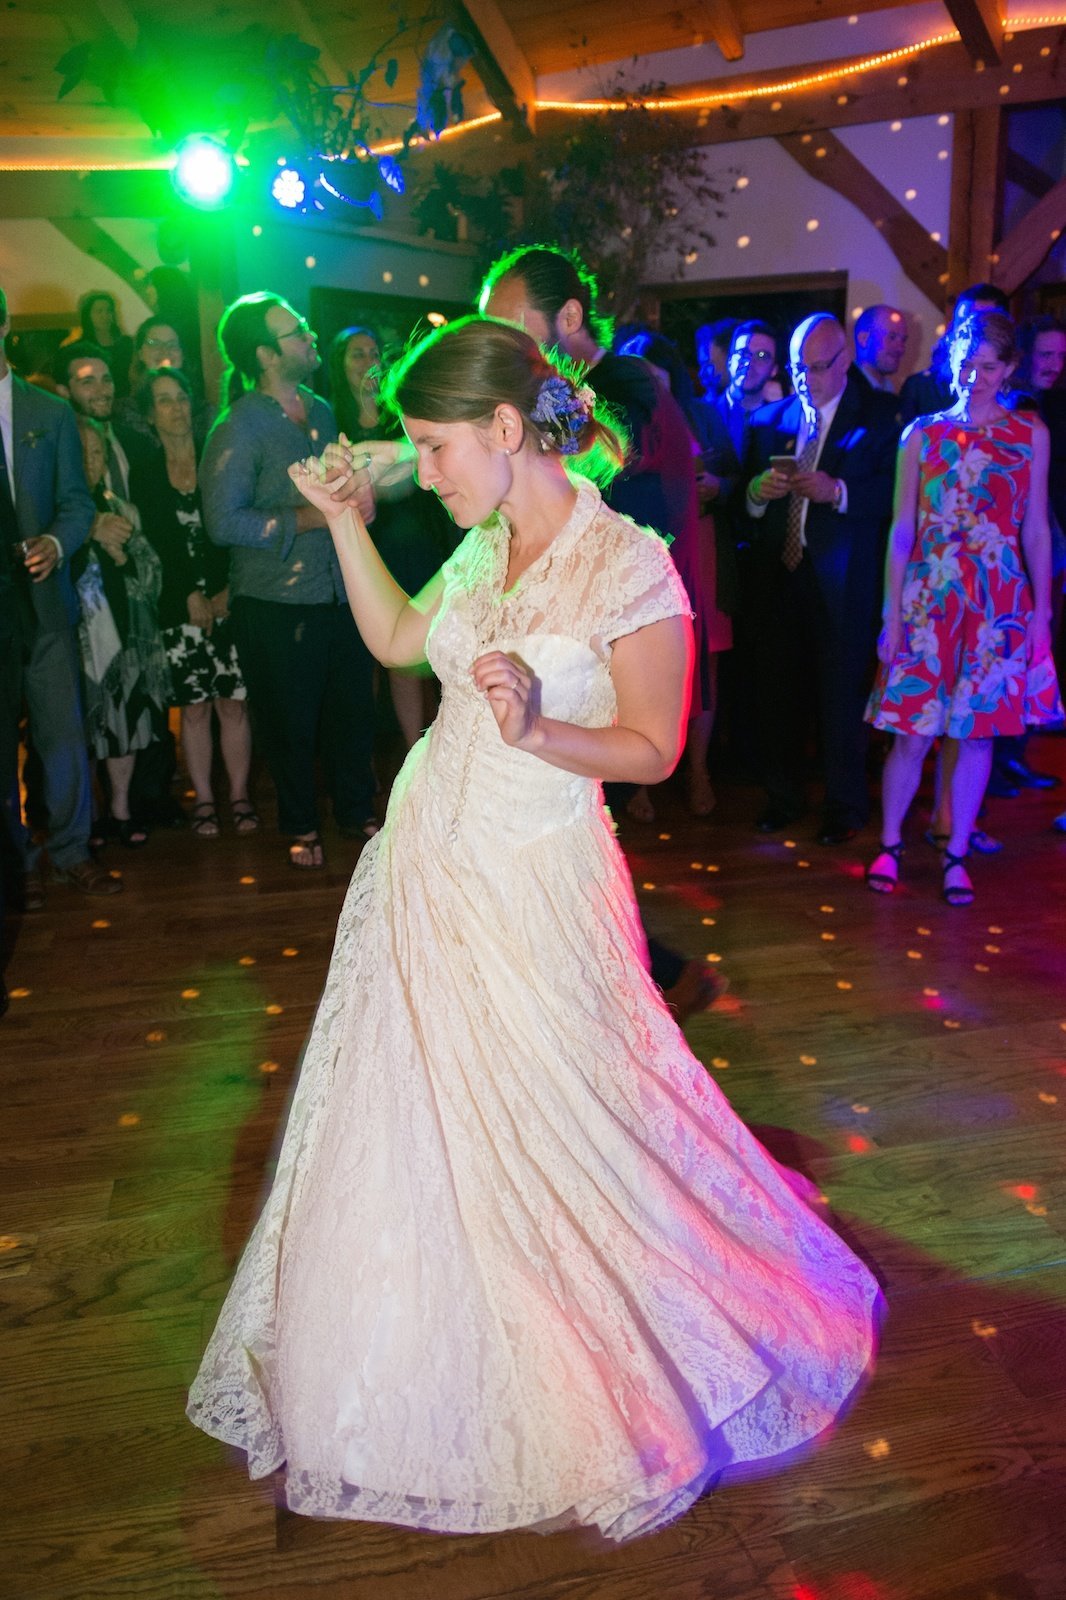 epic dance party photo at Vermont private residence wedding reception